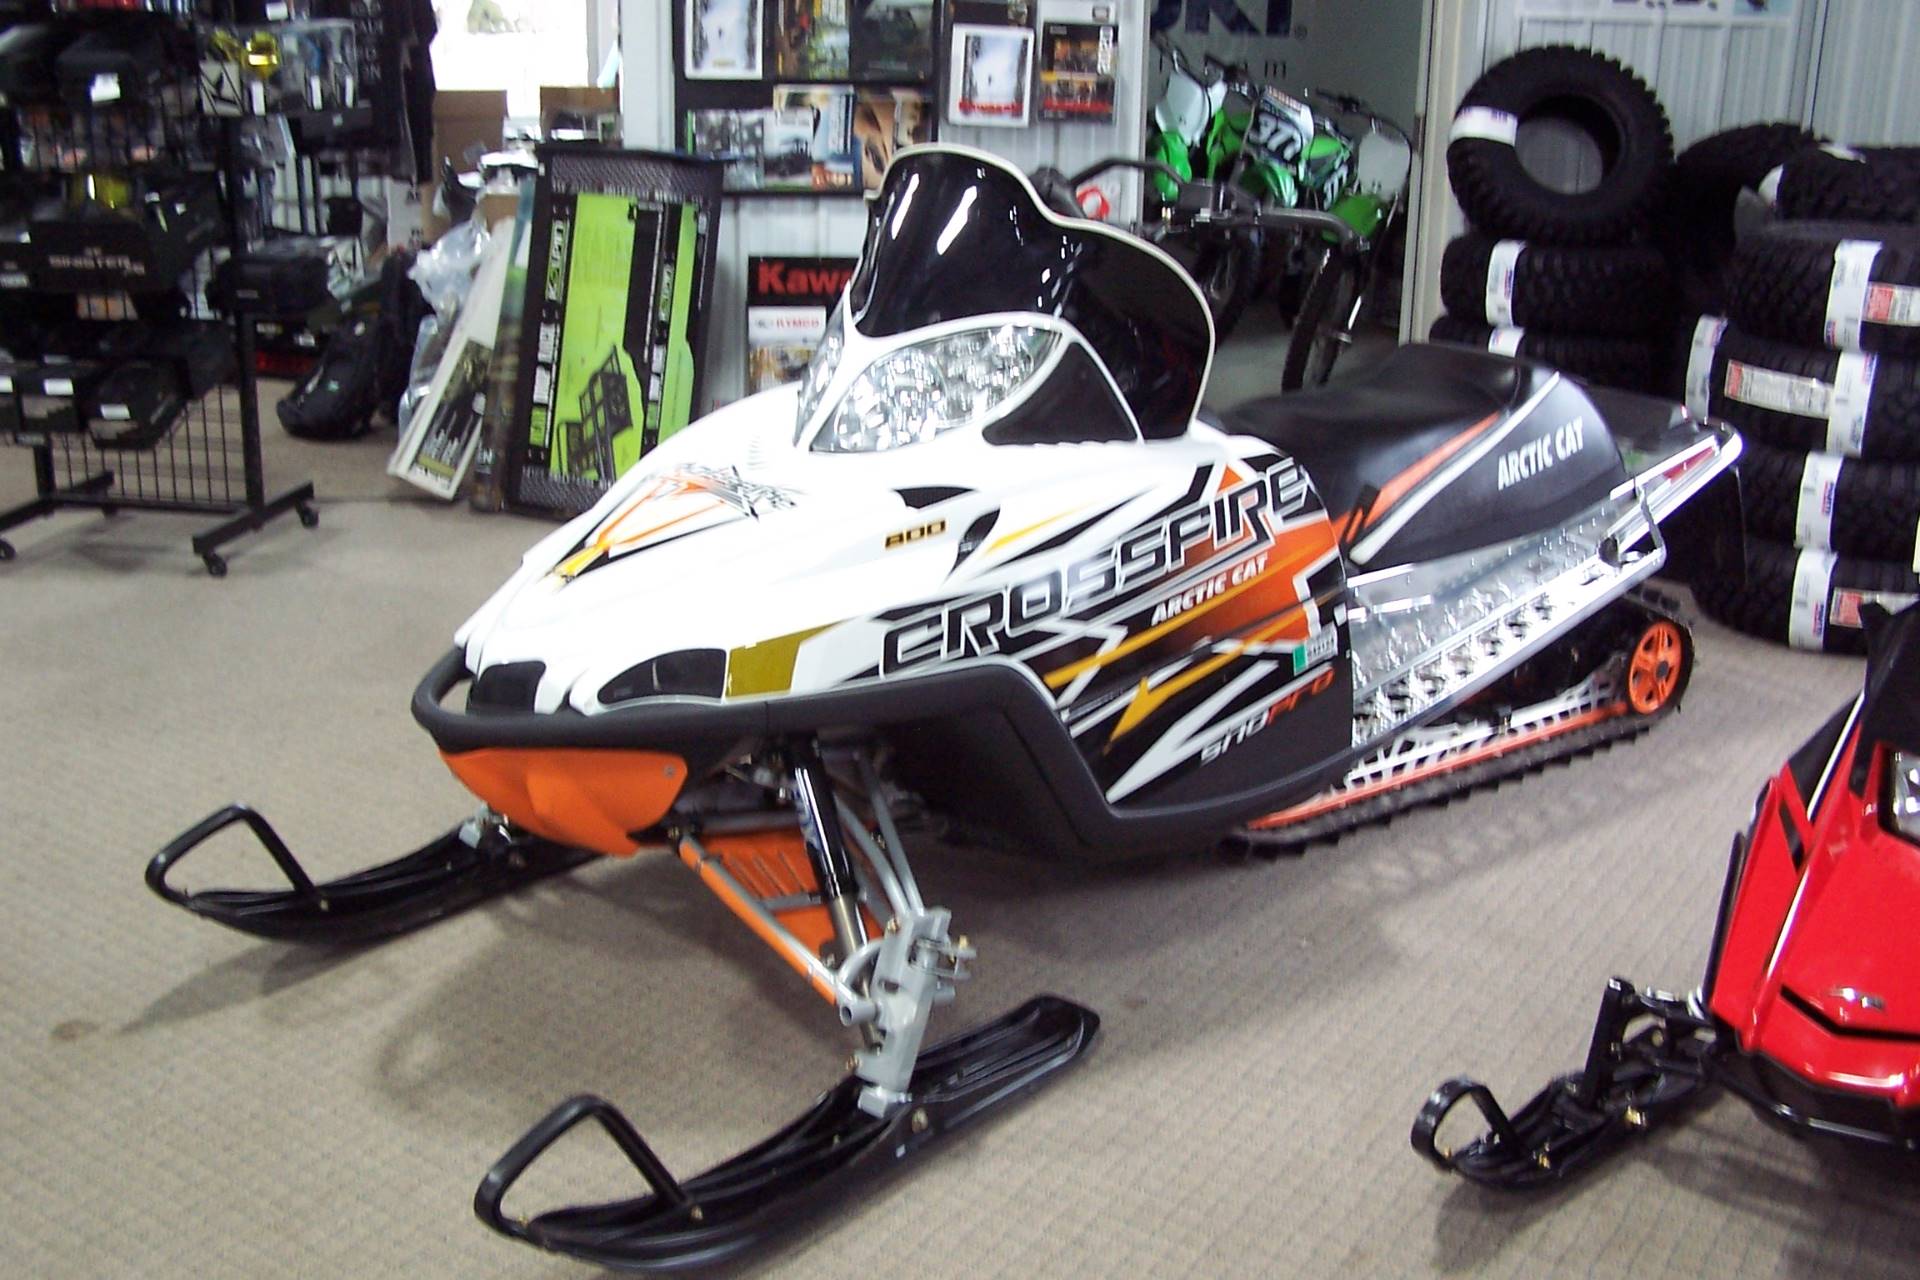 Used Arctic Cat Snowmobile Parts On Ebay